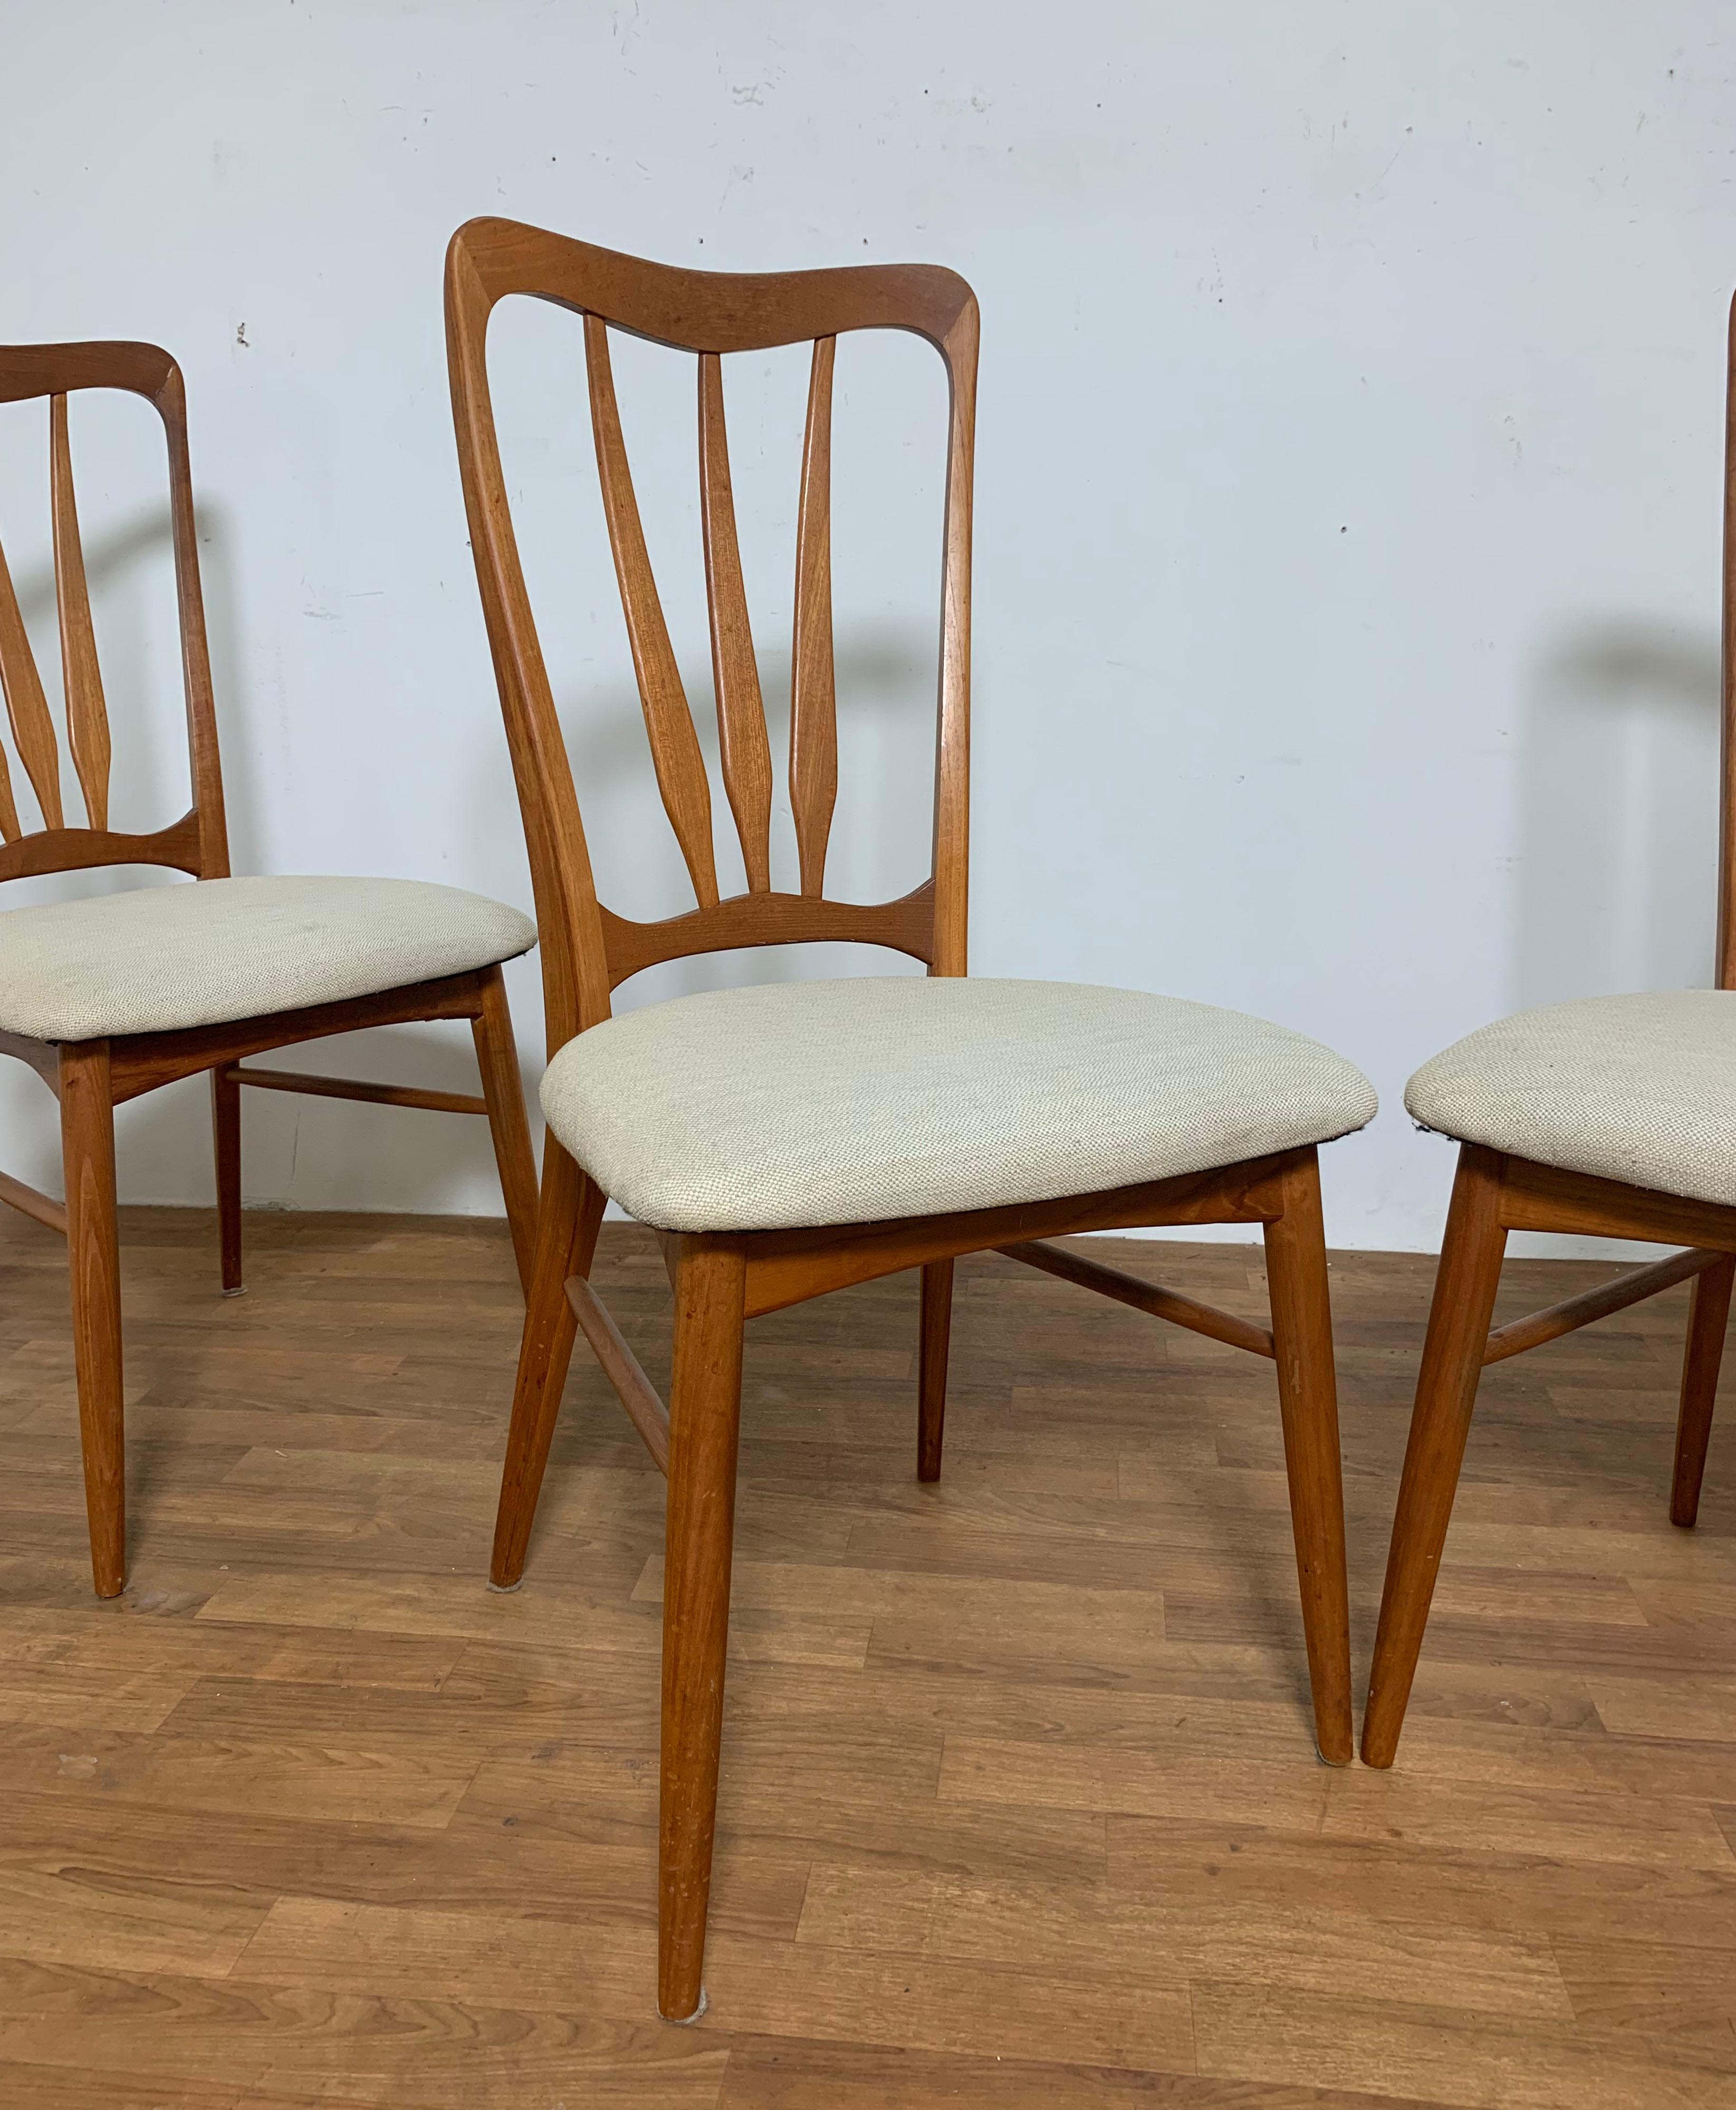 Set of four teak high back dining chairs with gracefully carved fan backs by Niels Koefoed for Koefoeds Hornslet, Denmark, known as the model 